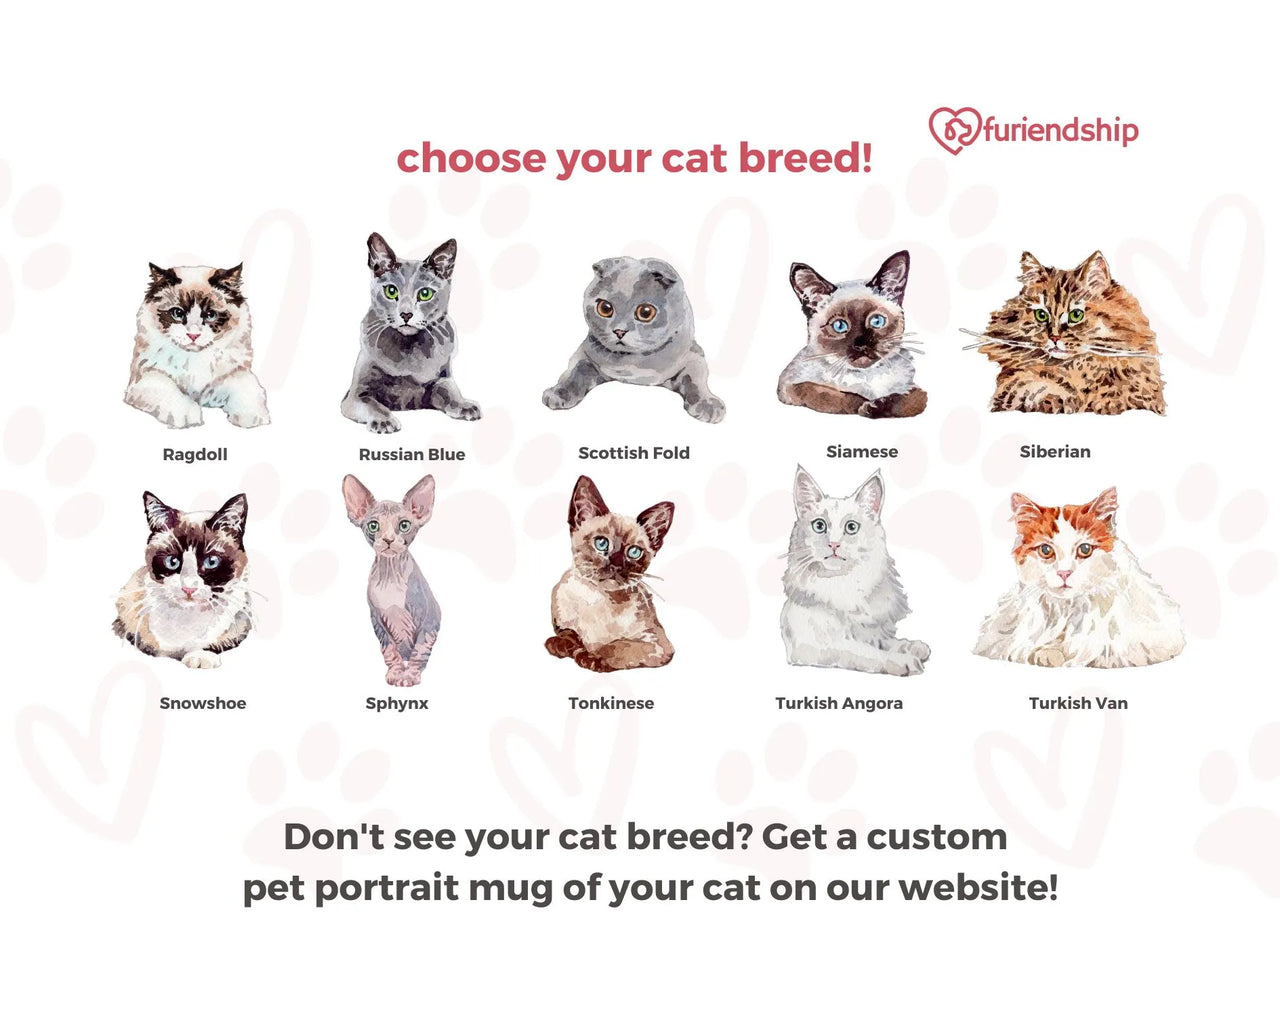 personalized cat mugs at furiendship